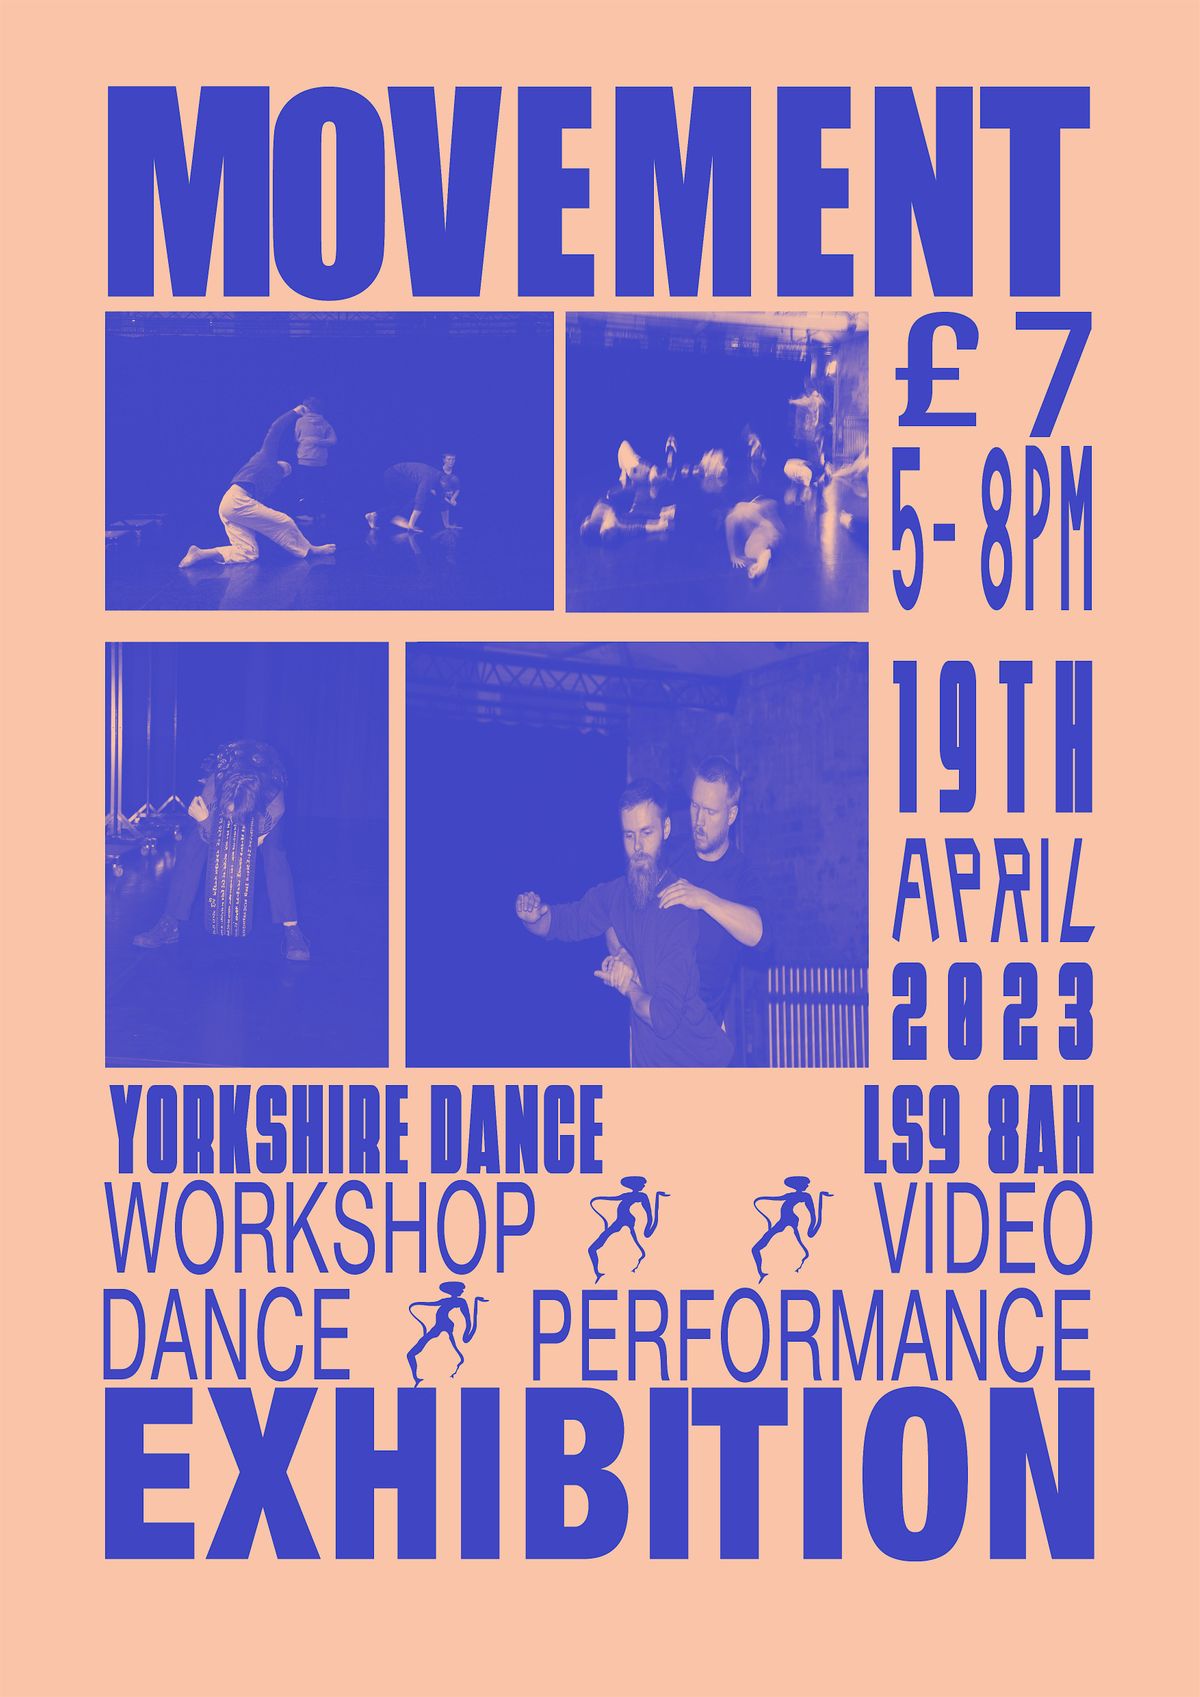 'Movement' : An evening of Creative Movement, Video and Performance